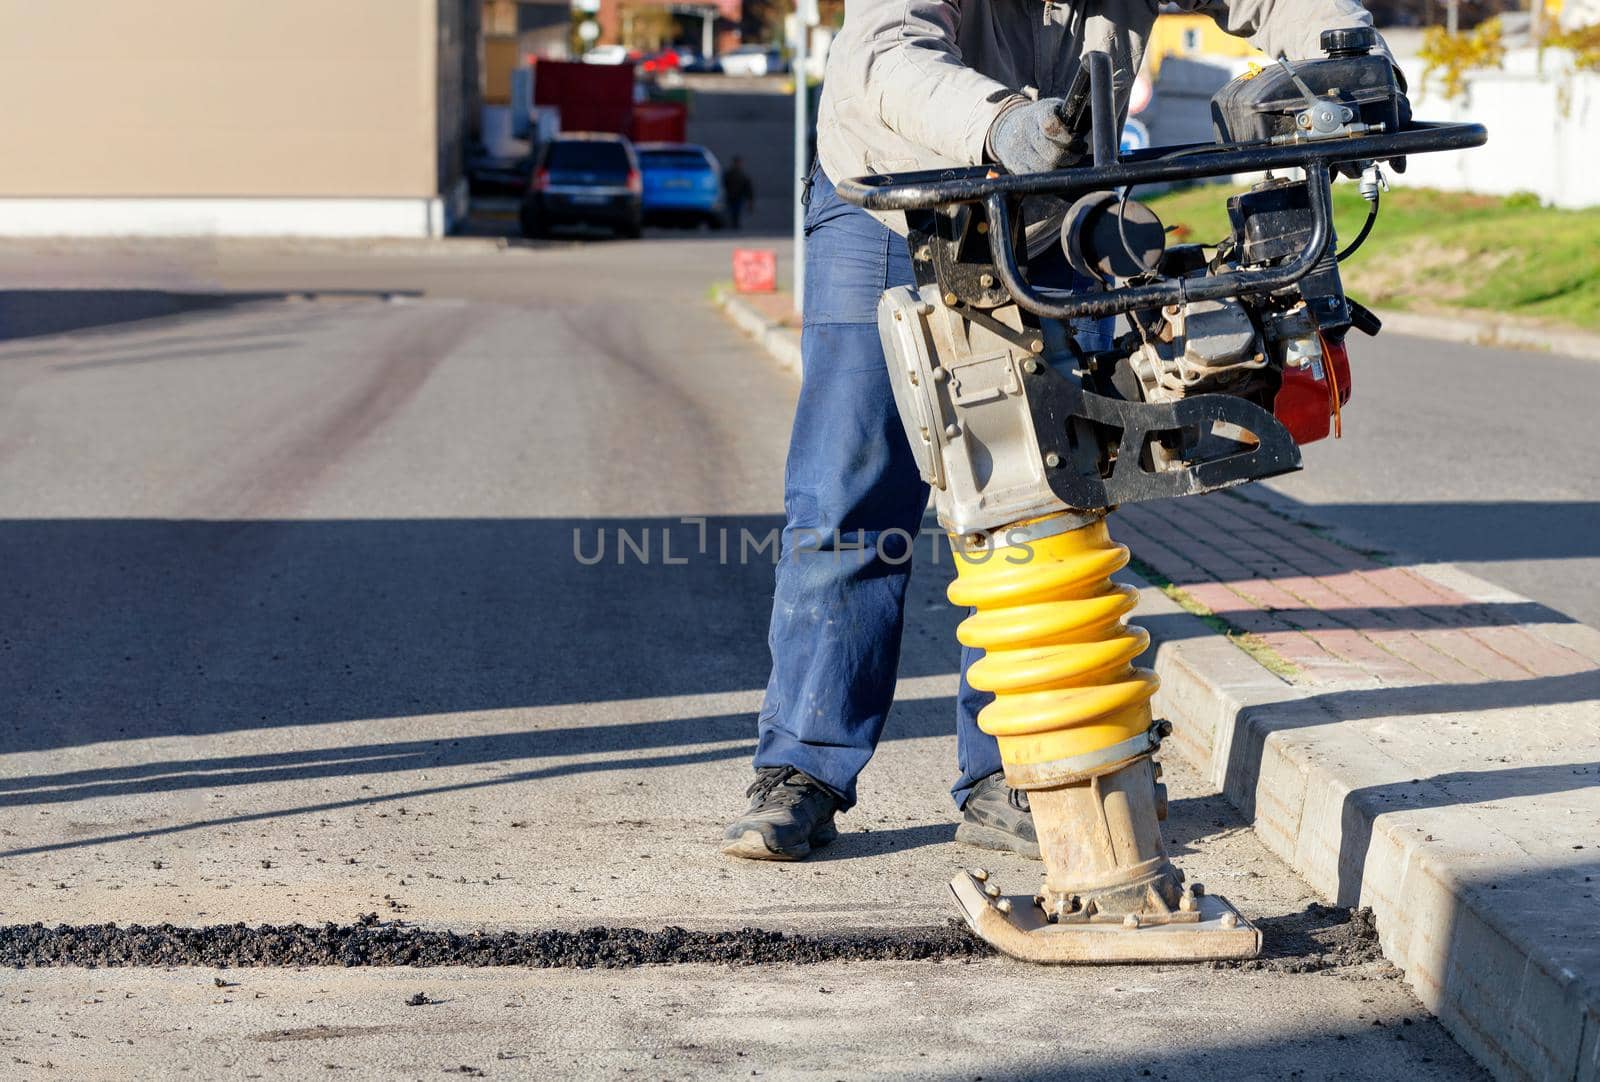 A road builder uses a vibration rammer to repair an asphalt road section. by Sergii